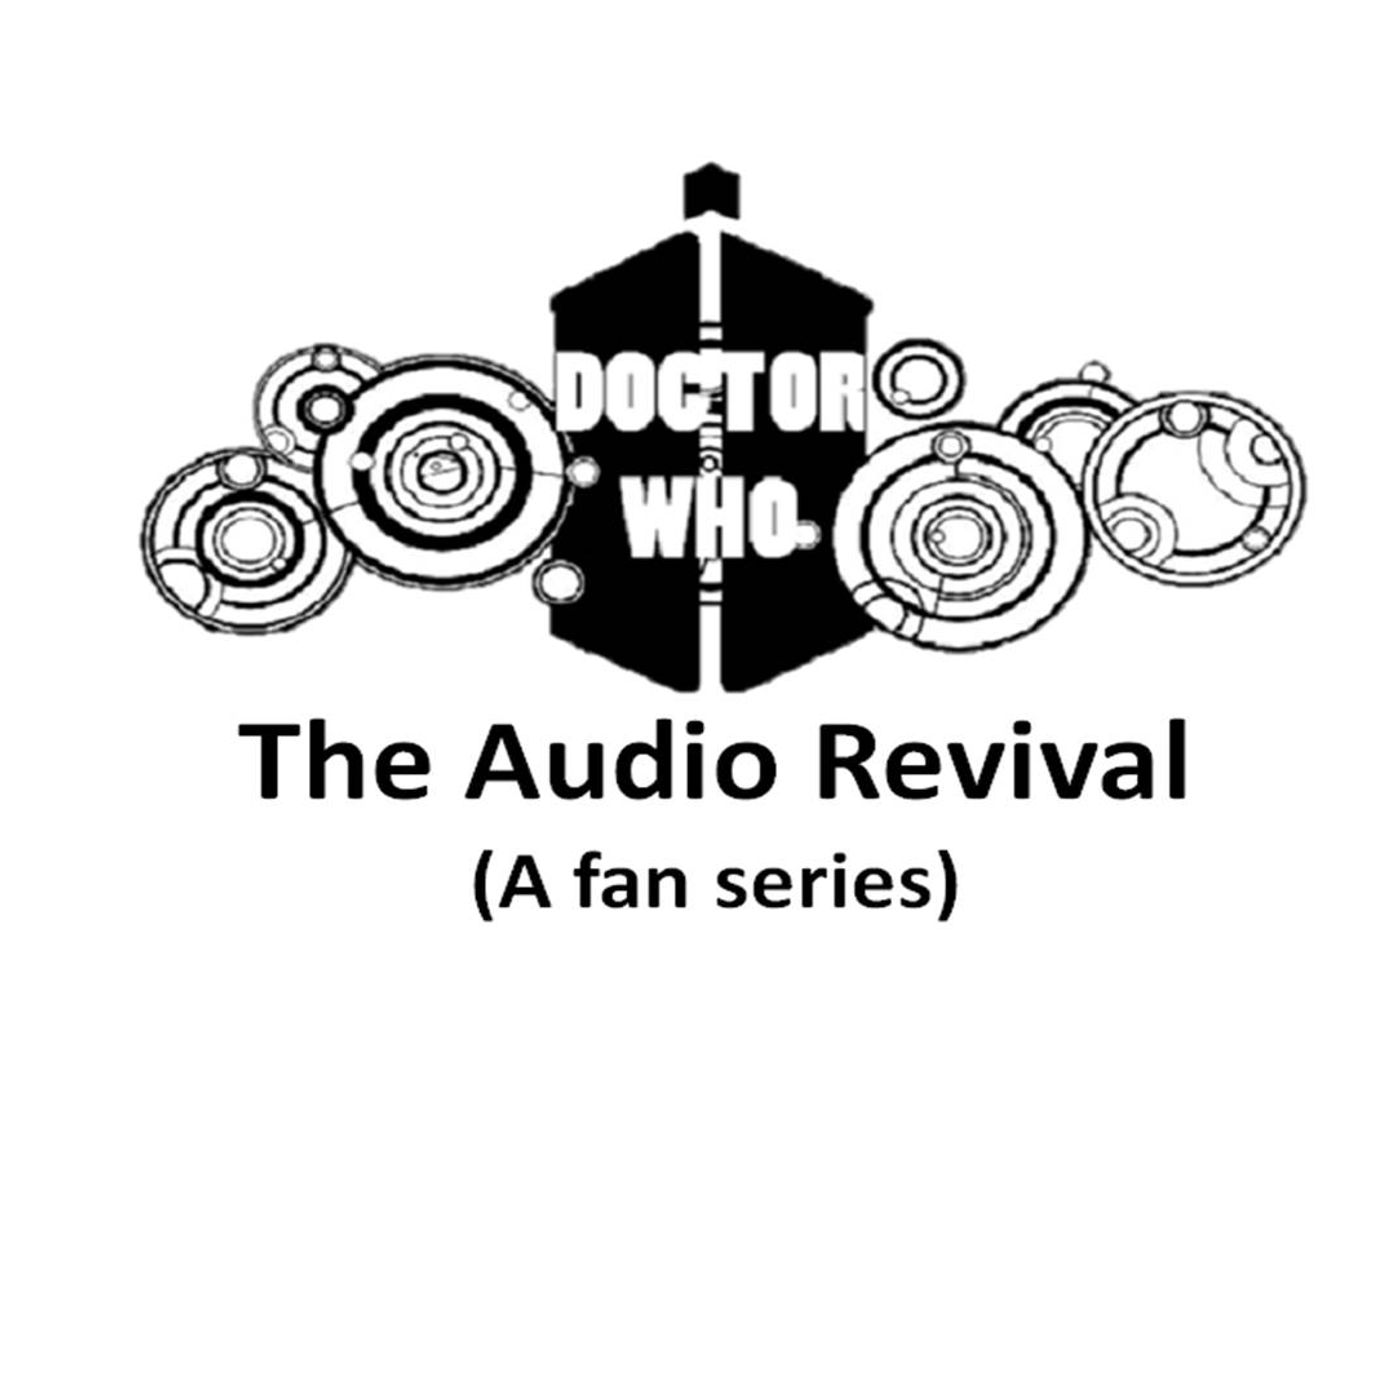 Doctor Who - The Audio Revival